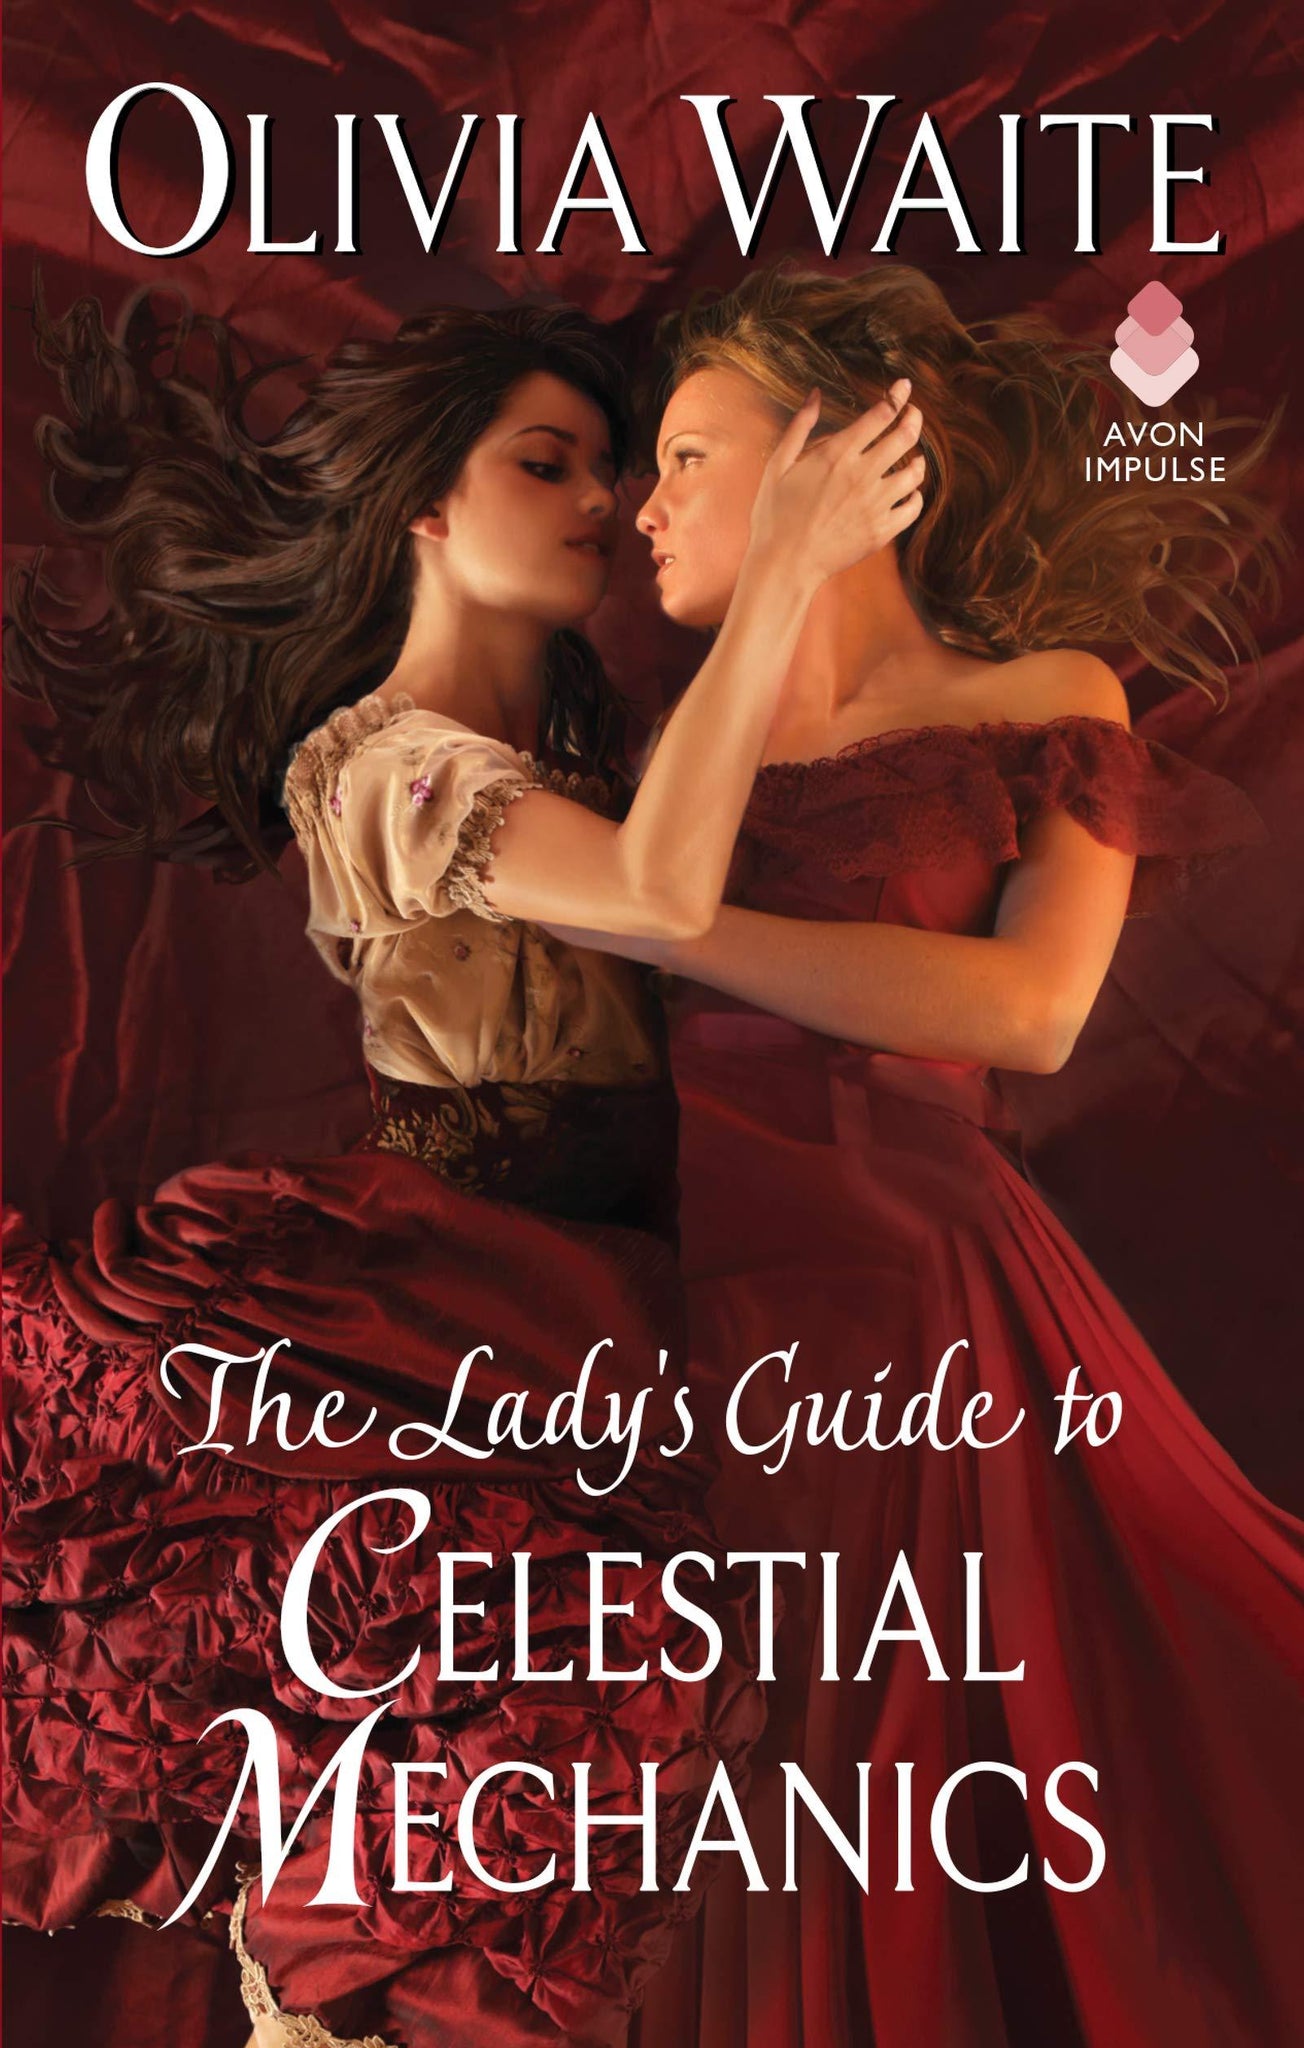 The Lady's Guide to Celestial Mechanics: Feminine Pursuits - ShopQueer.co